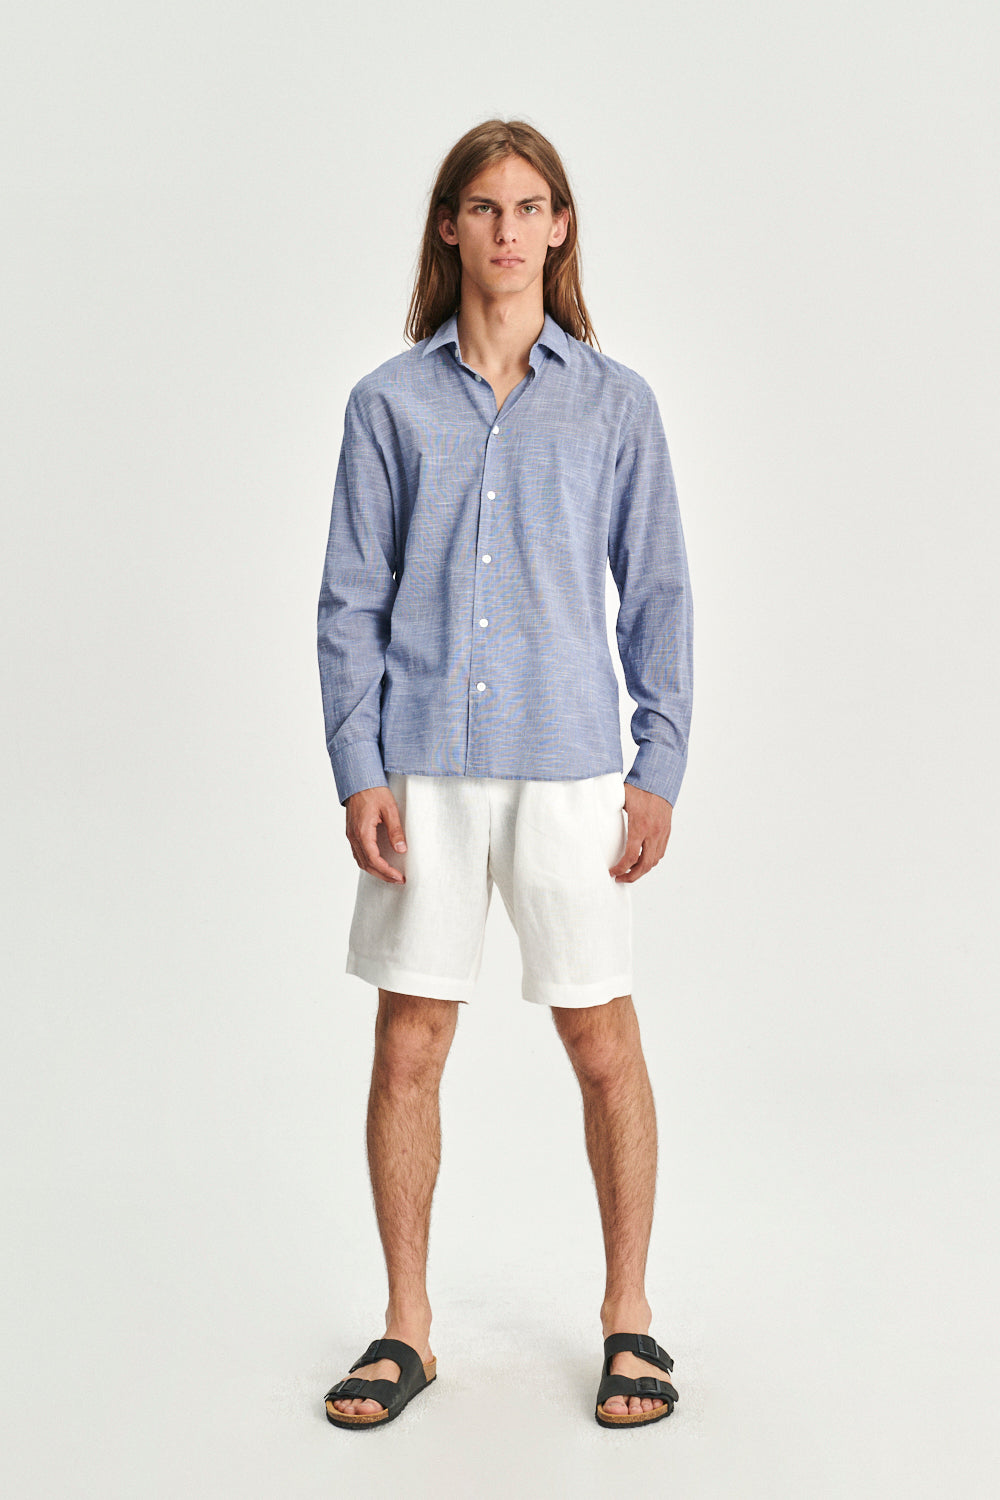 Feel Good Shirt in the Finest Blue Airy Italian Cotton by Albini